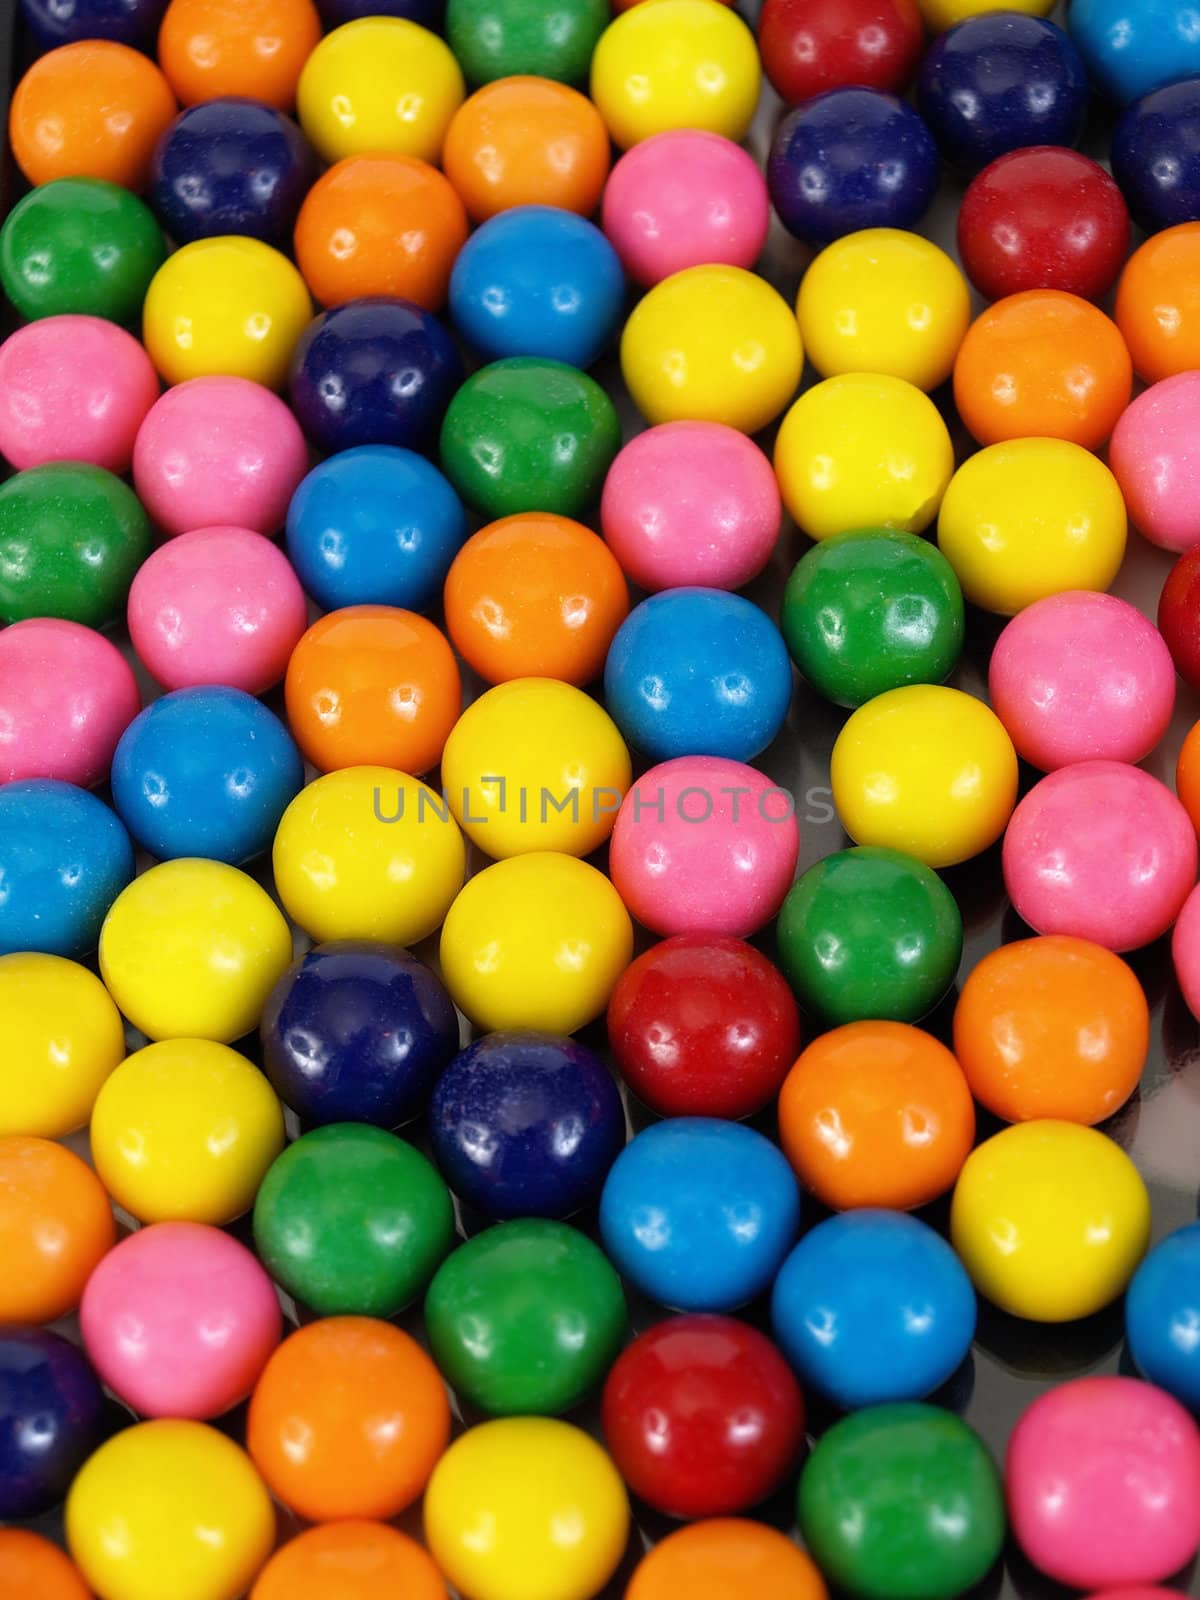 A colorful variety of gumballs in a close but random pattern.